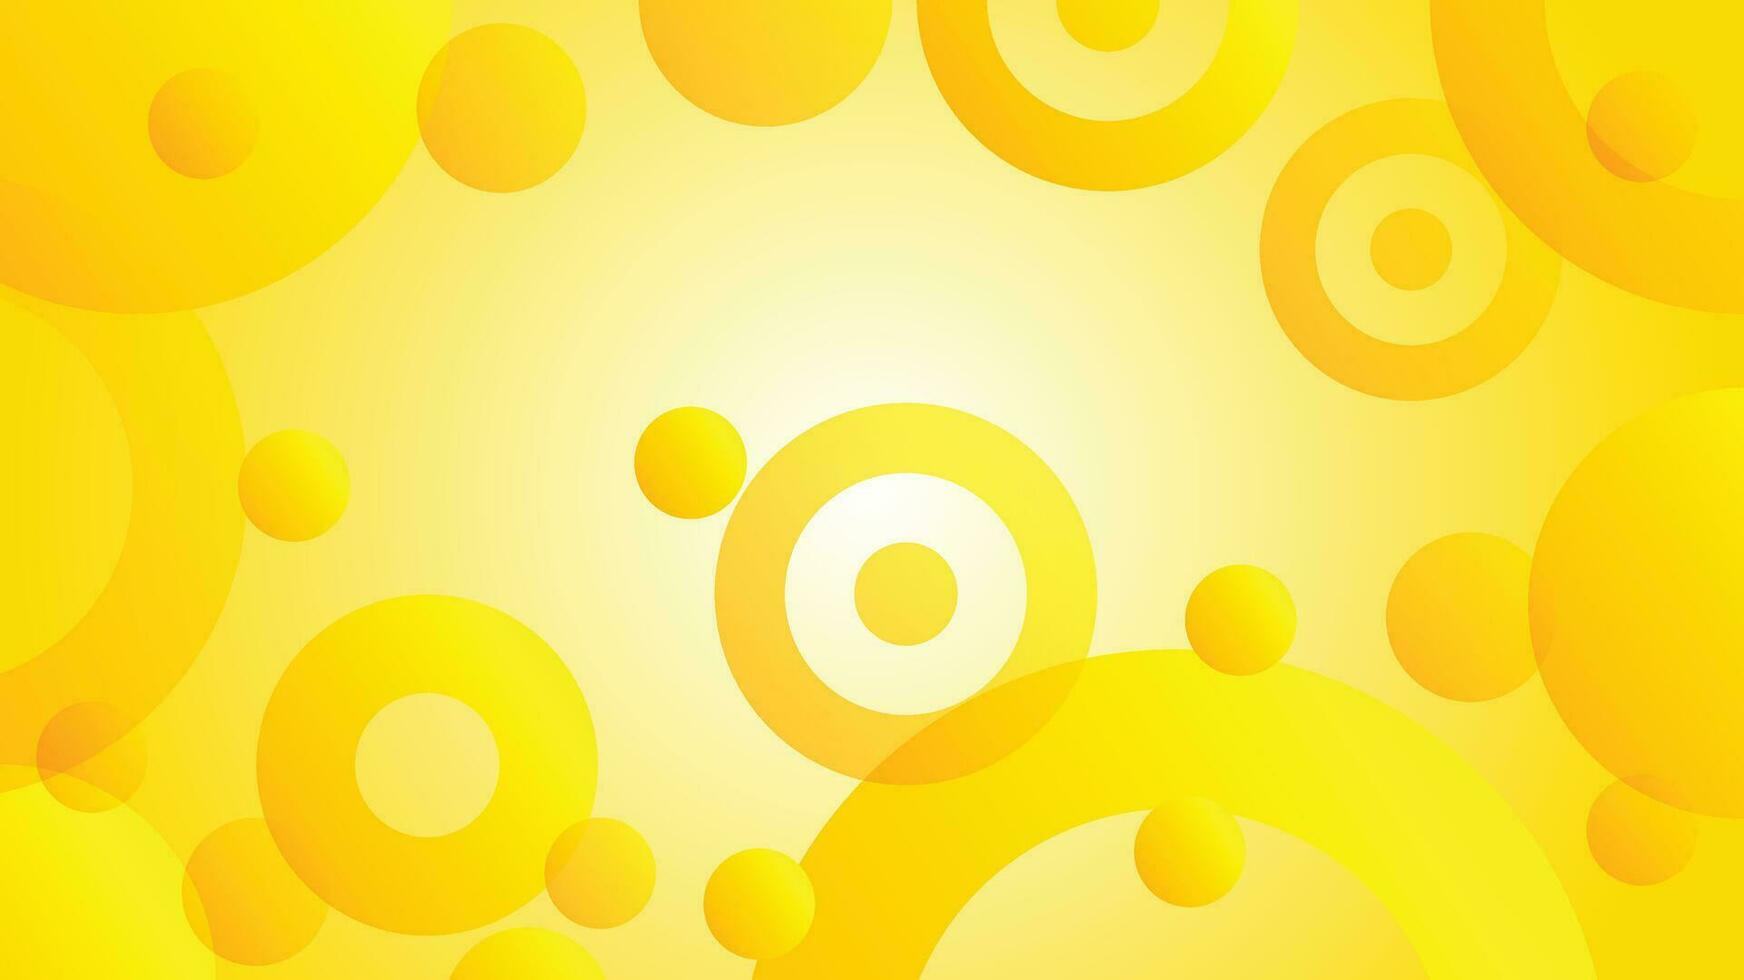 white and yellow dynamic circle shapes abstract background vector